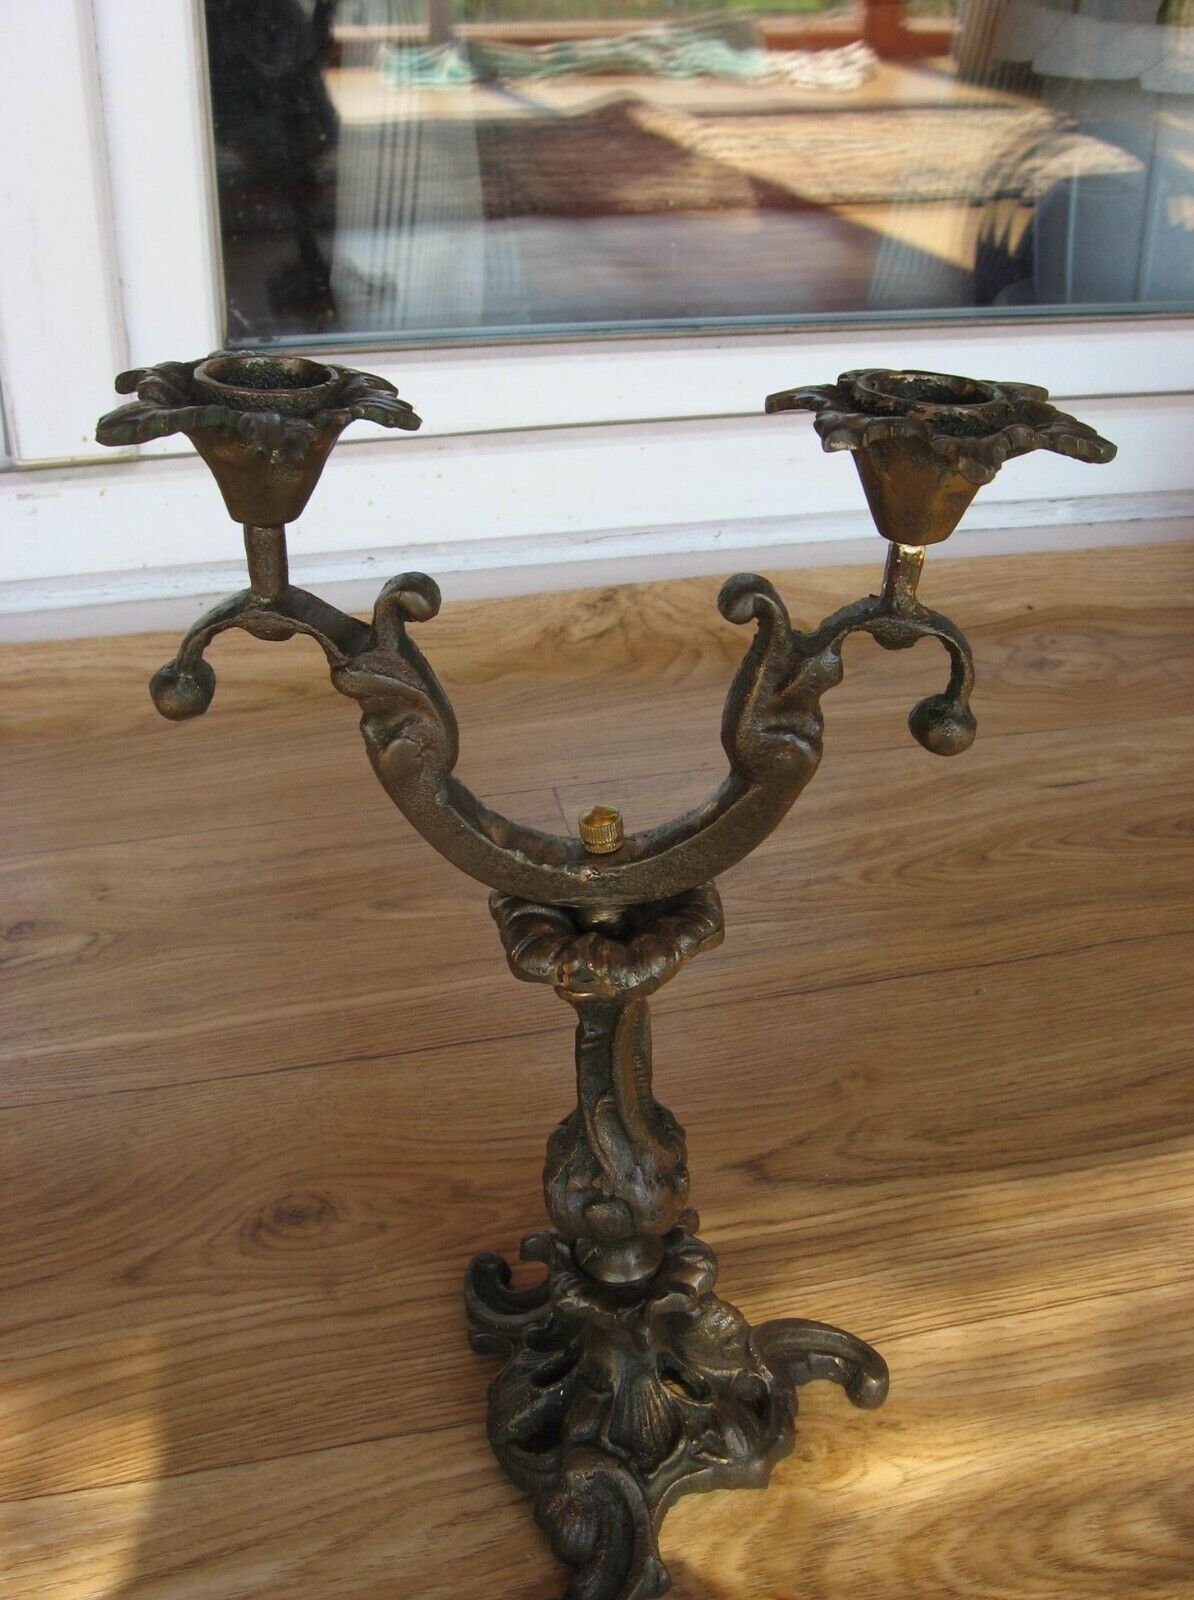 Antique bronze two-arm candlestick, Imperial Russia, rare